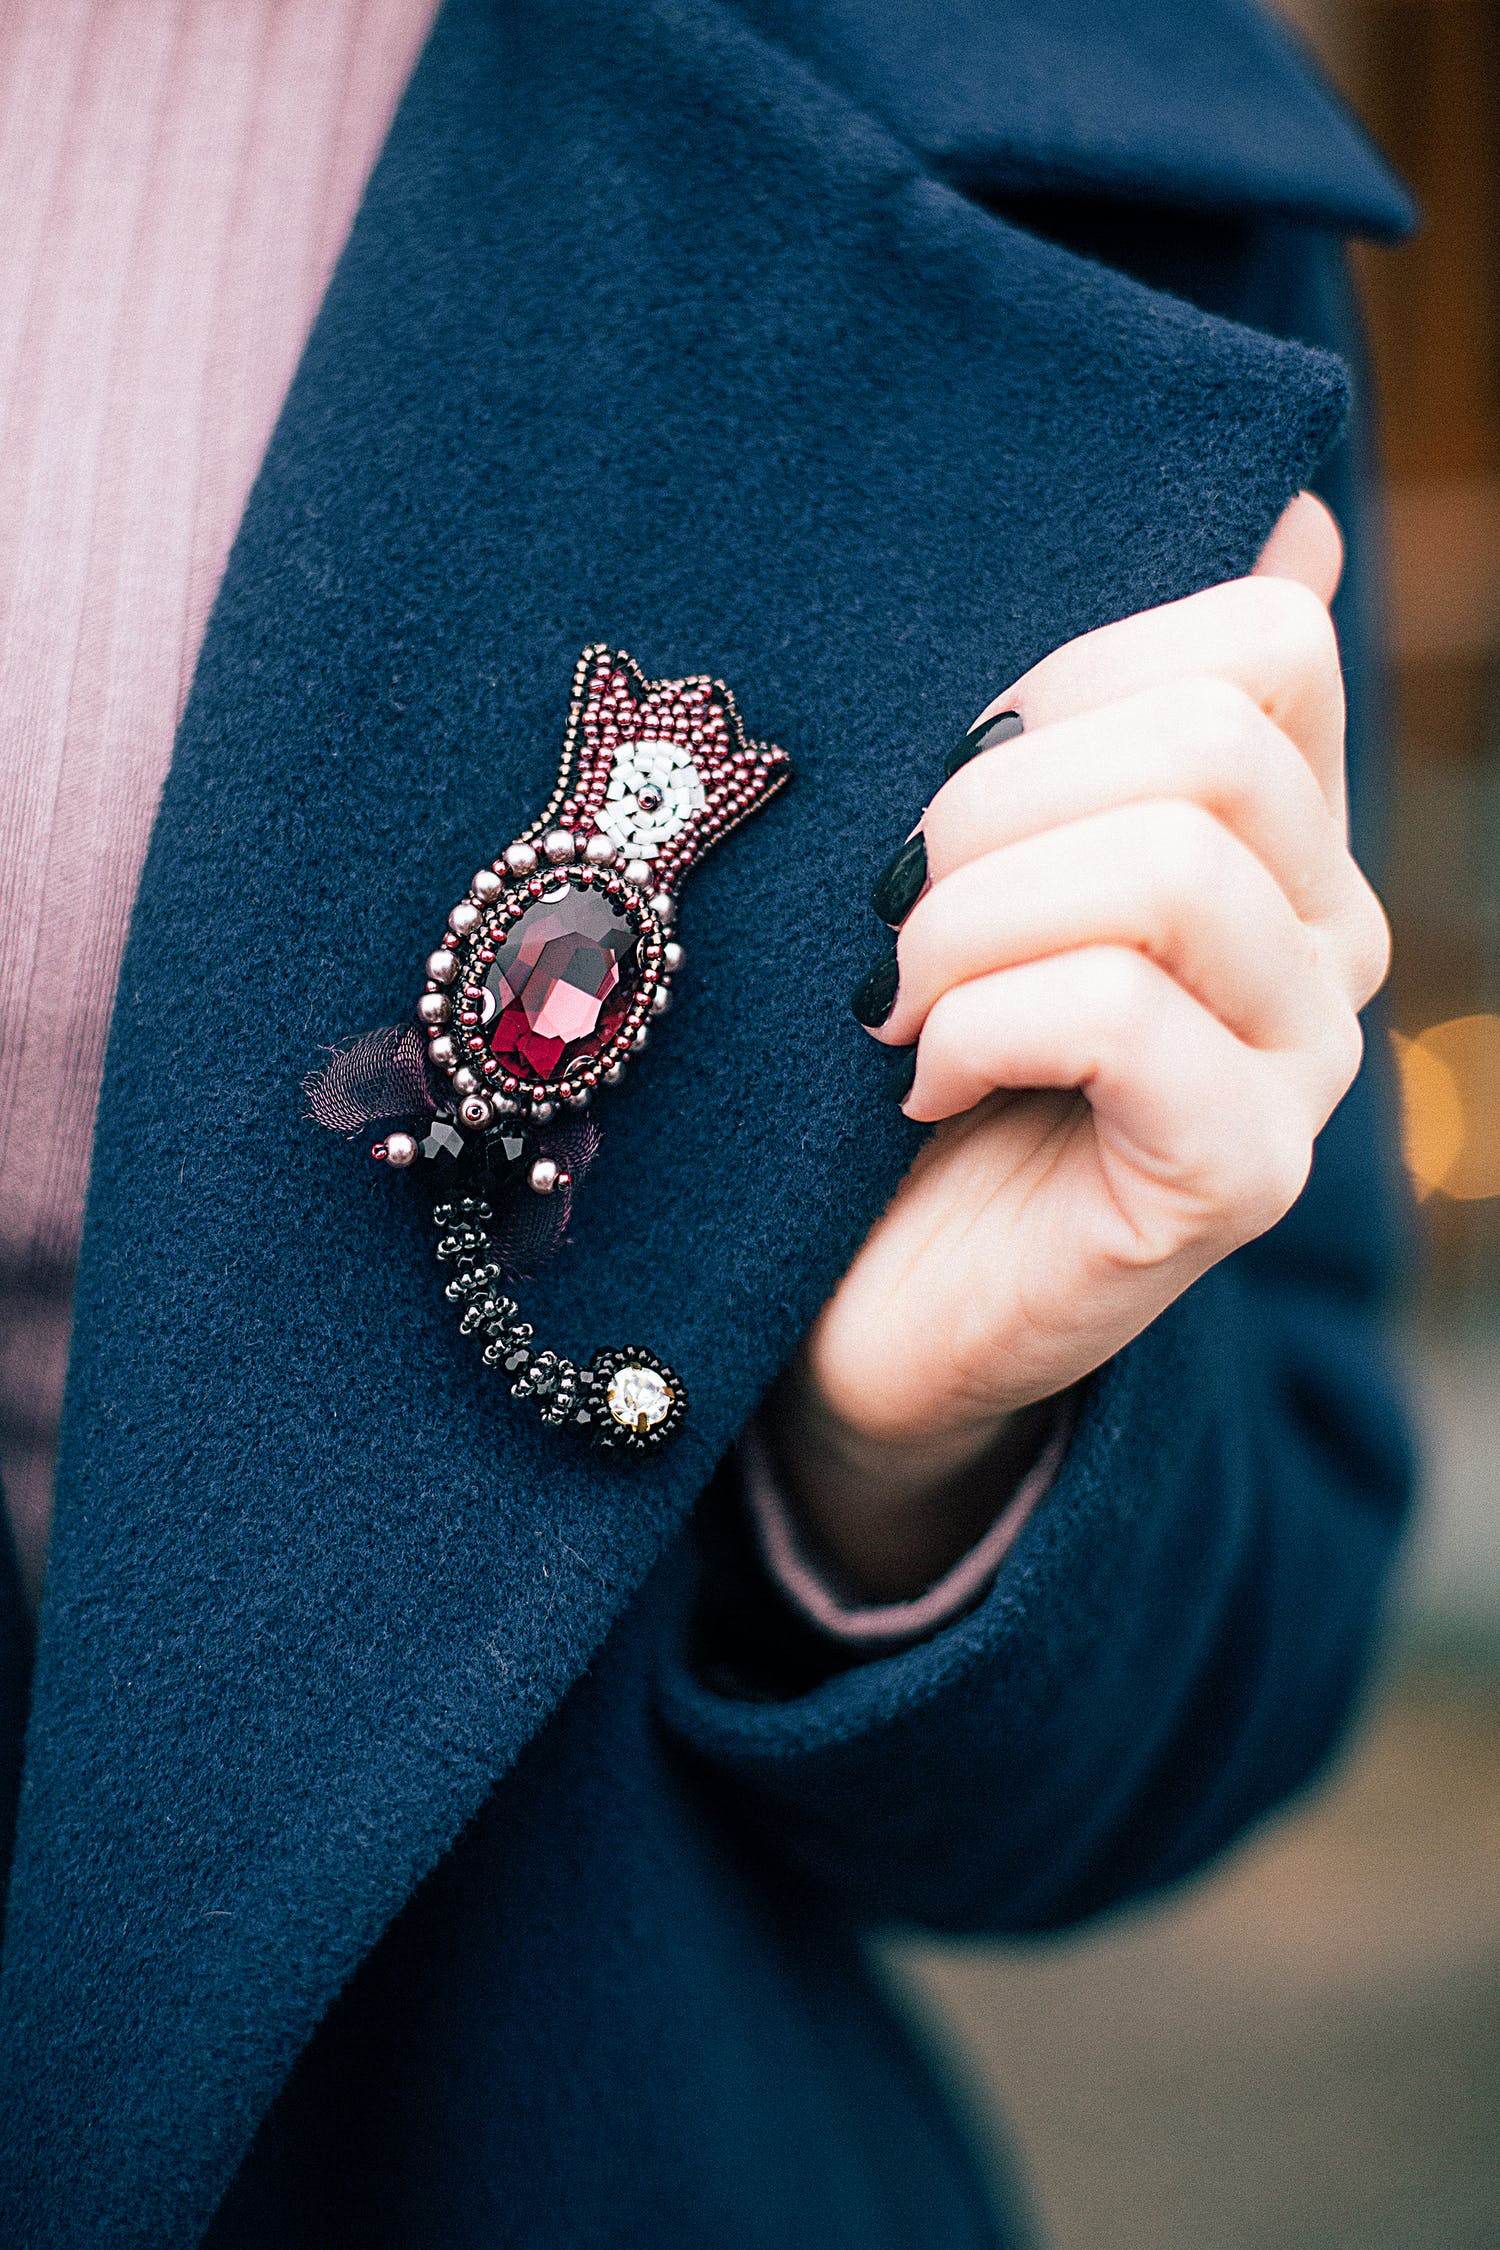 Wearing a brooch with a blue coat